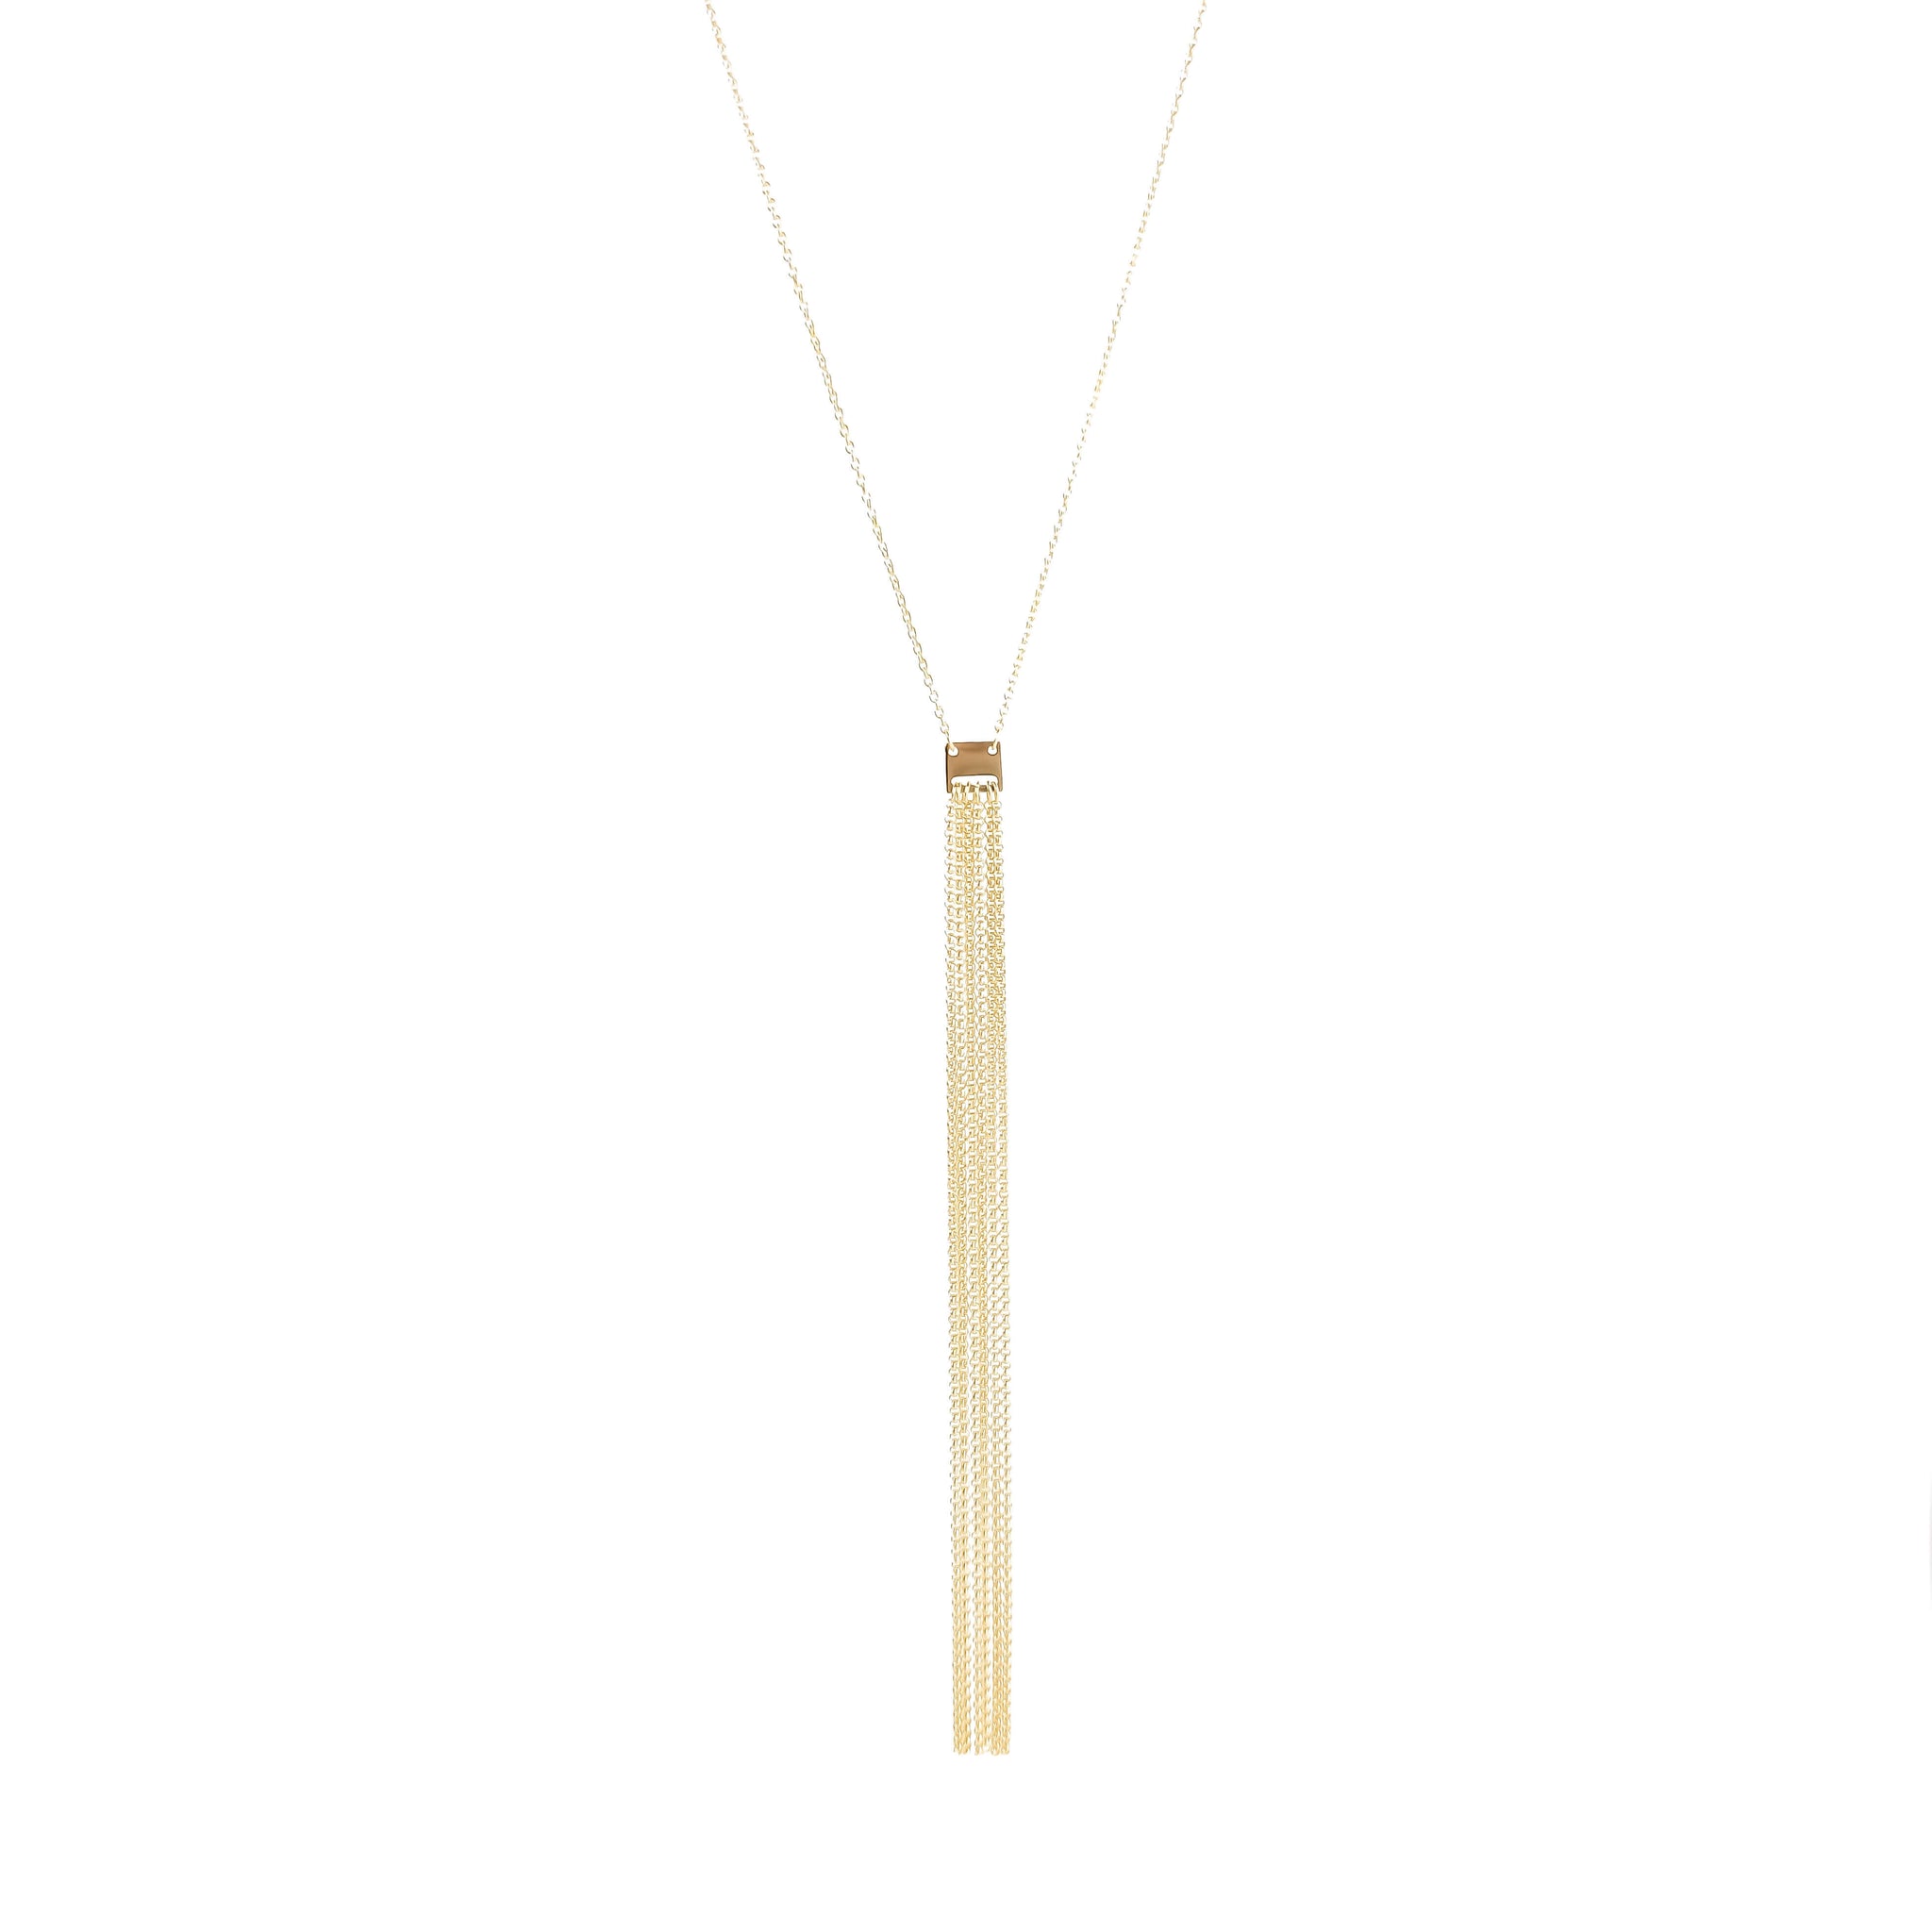 Thin gold necklace with gold strands formed into a tassel 